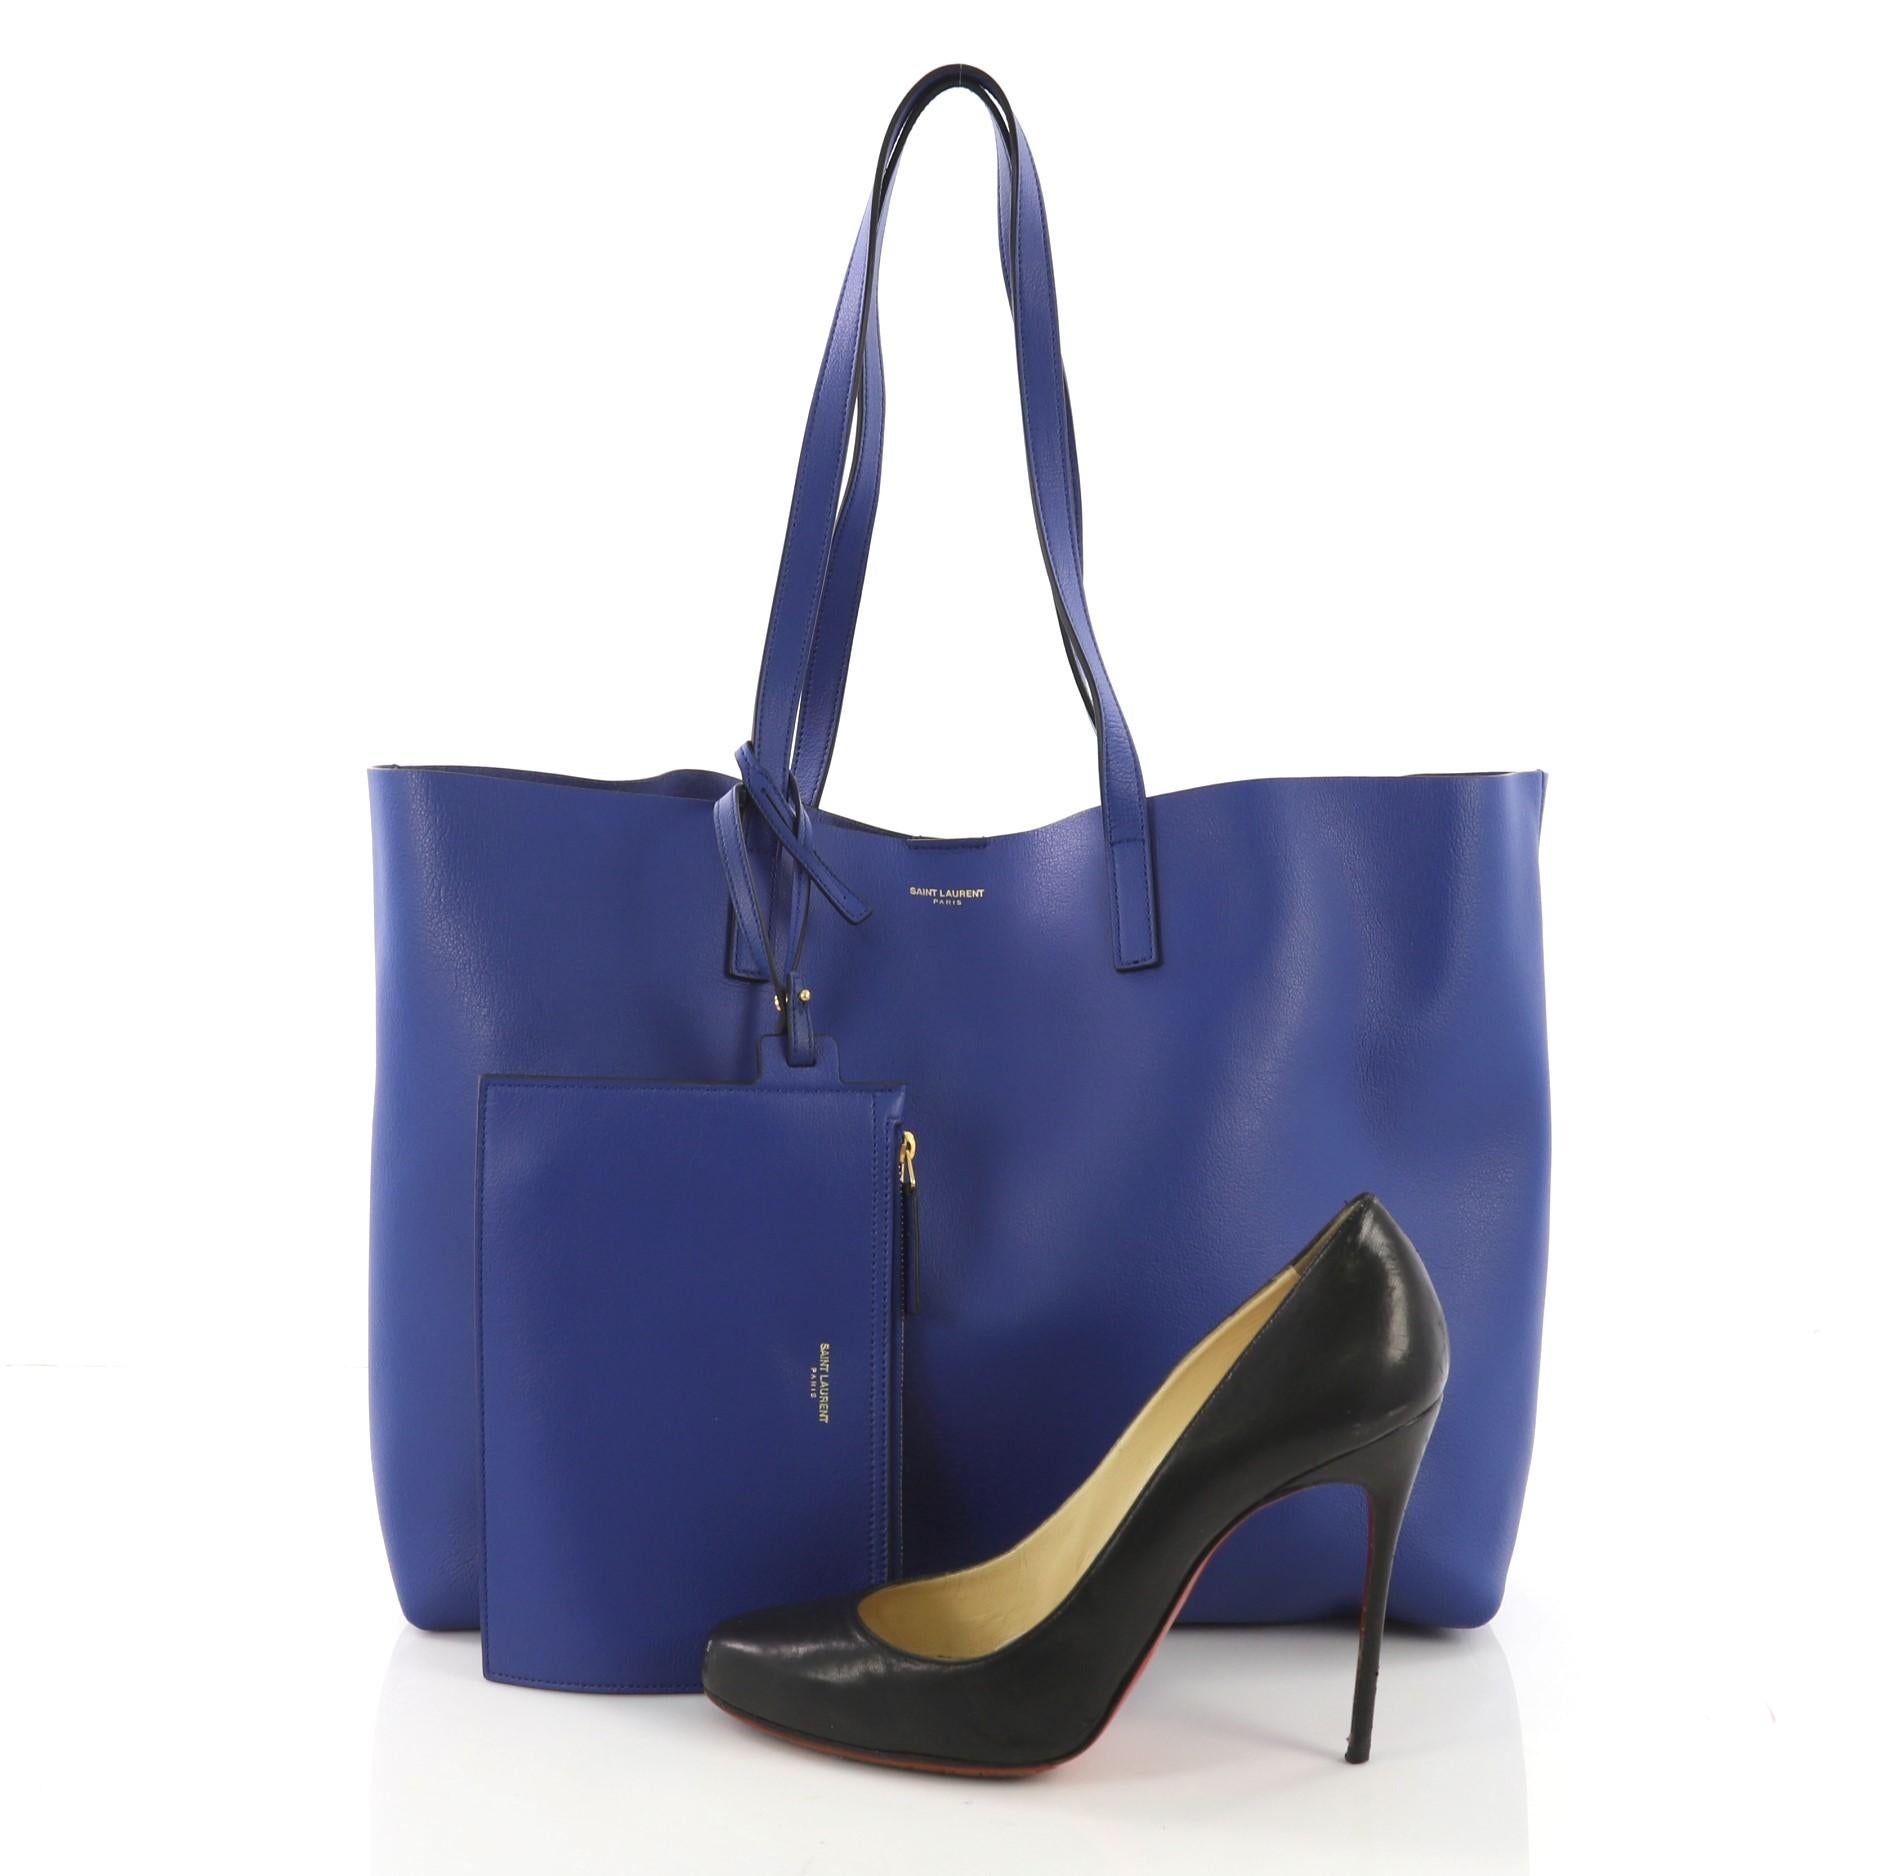 This Saint Laurent Shopper Tote Leather Large, crafted from blue leather, features dual flat leather handles, stamped logo at its center, and gold-tone hardware. Its magnetic snap closure opens to a blue raw leather interior. **Note: Shoe